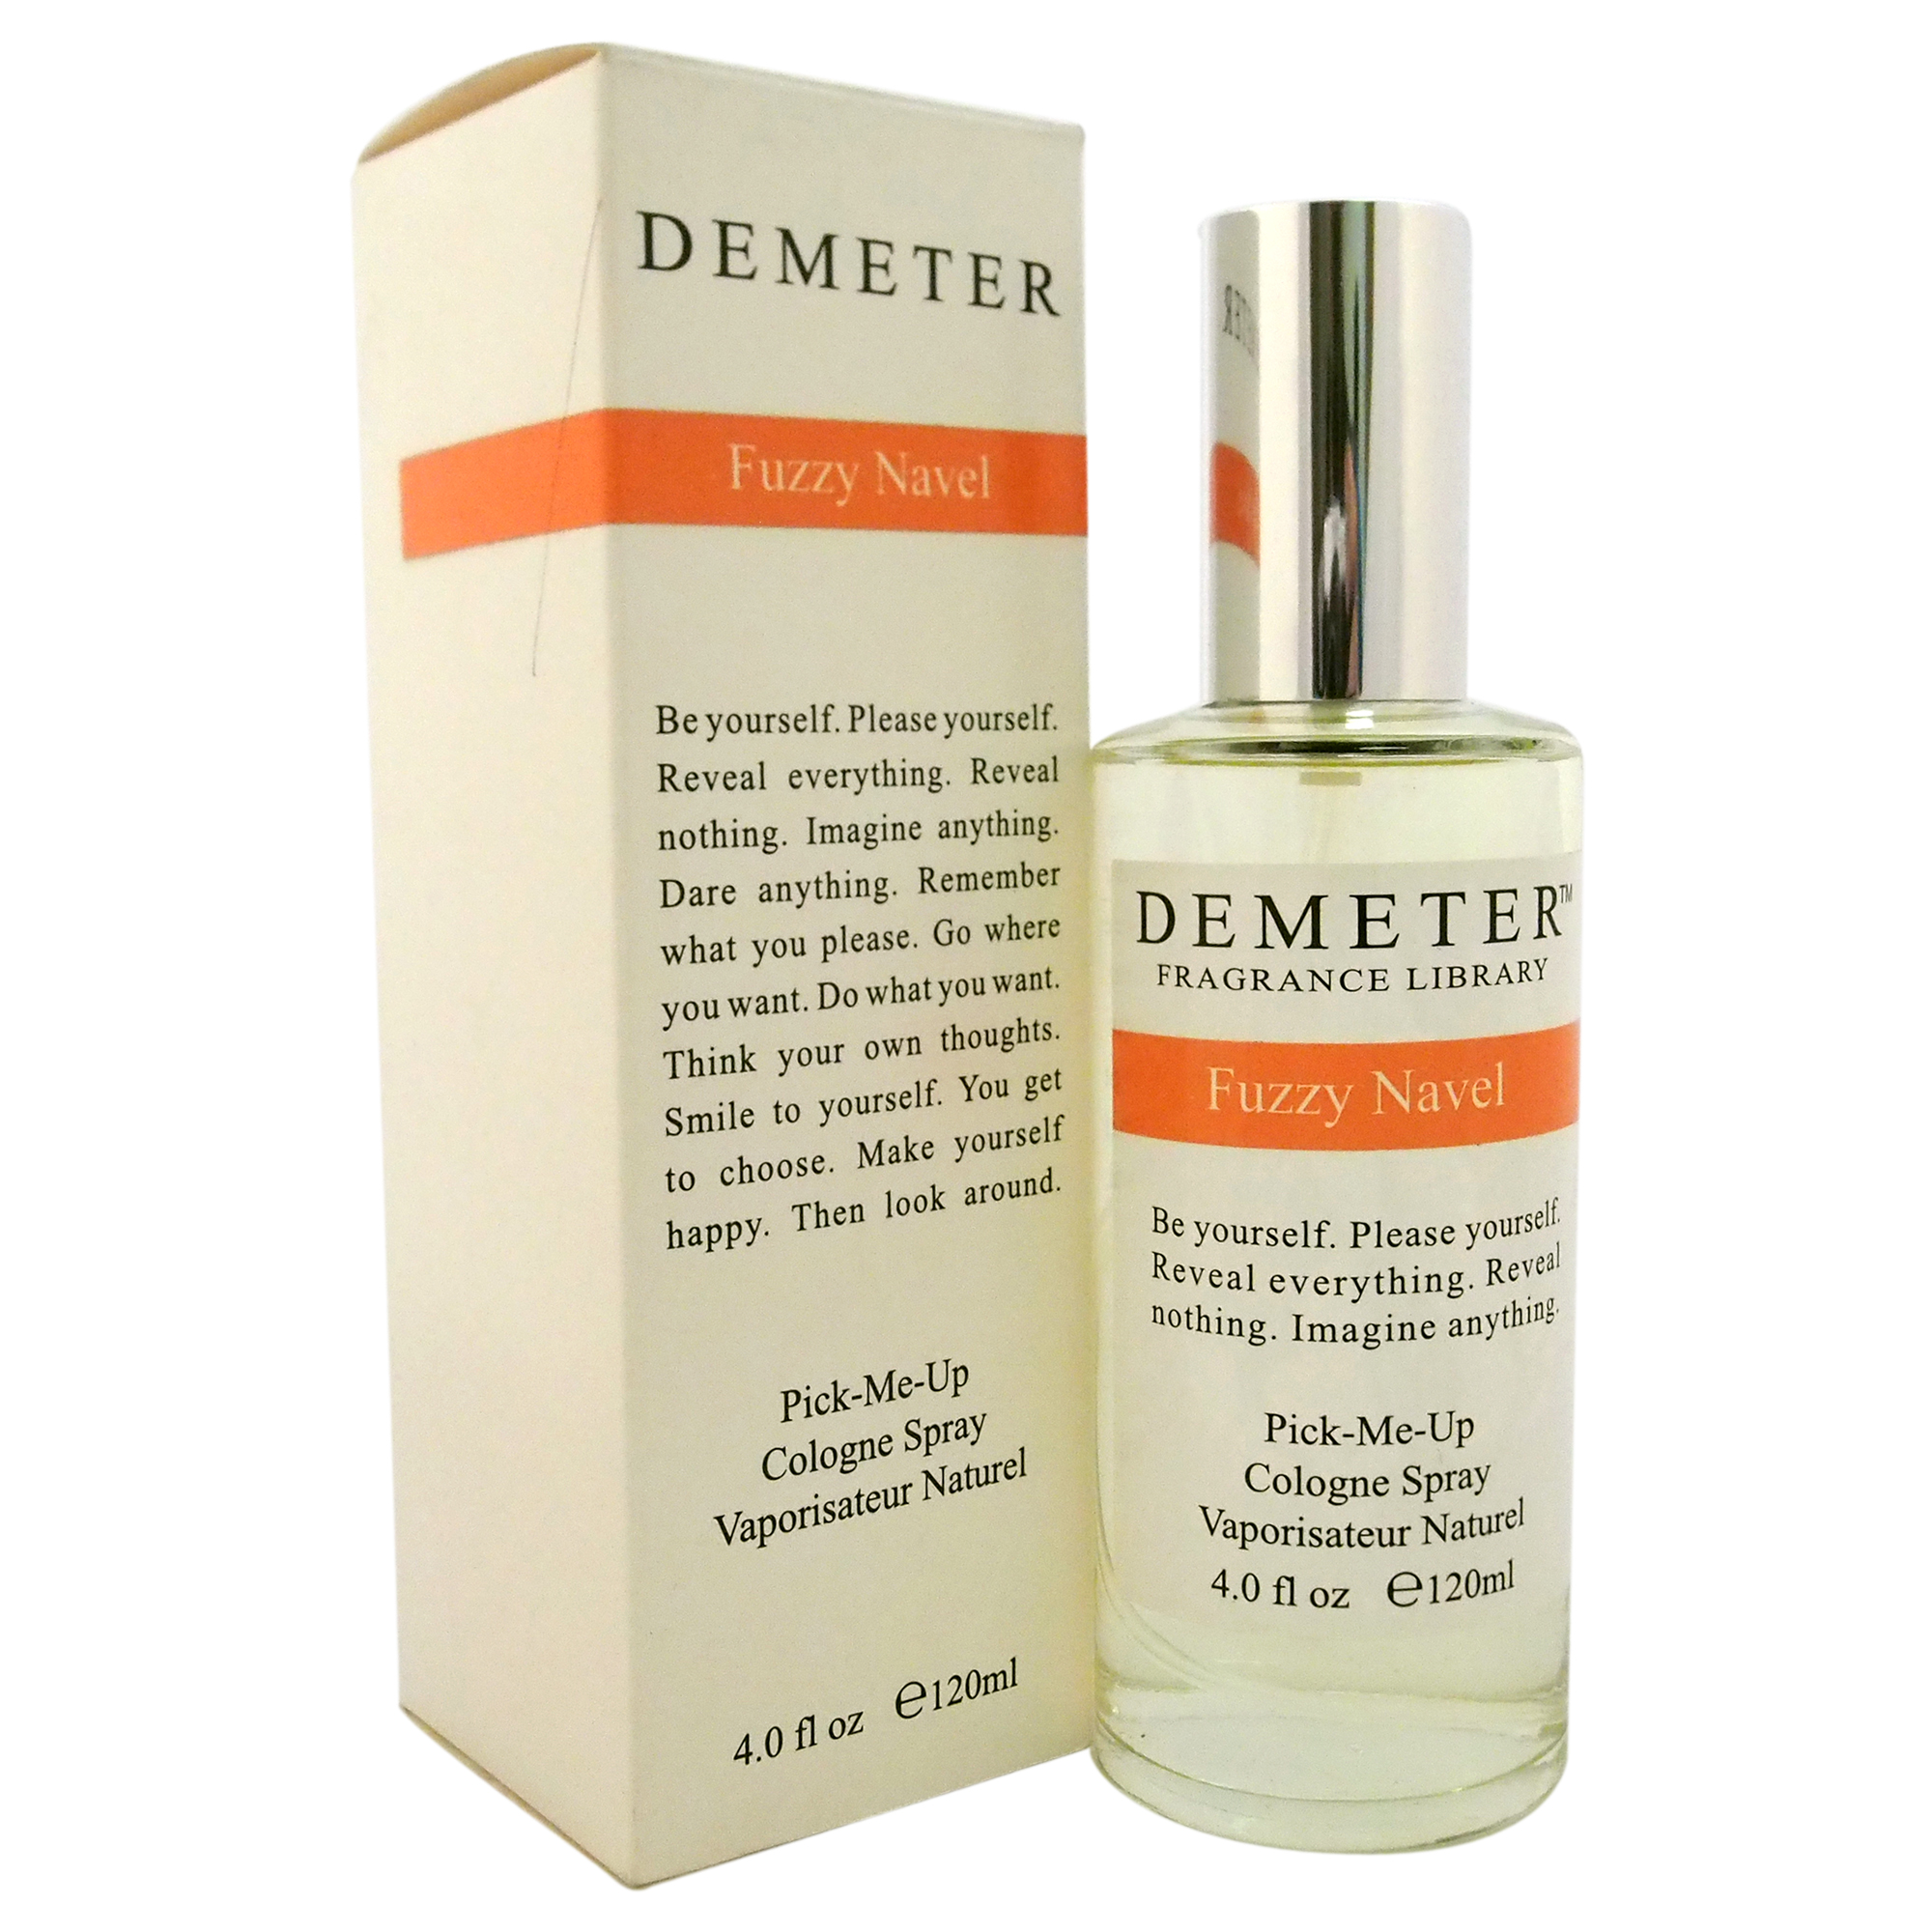 Fuzzy Navel by Demeter for Women - 4 oz Cologne Spray